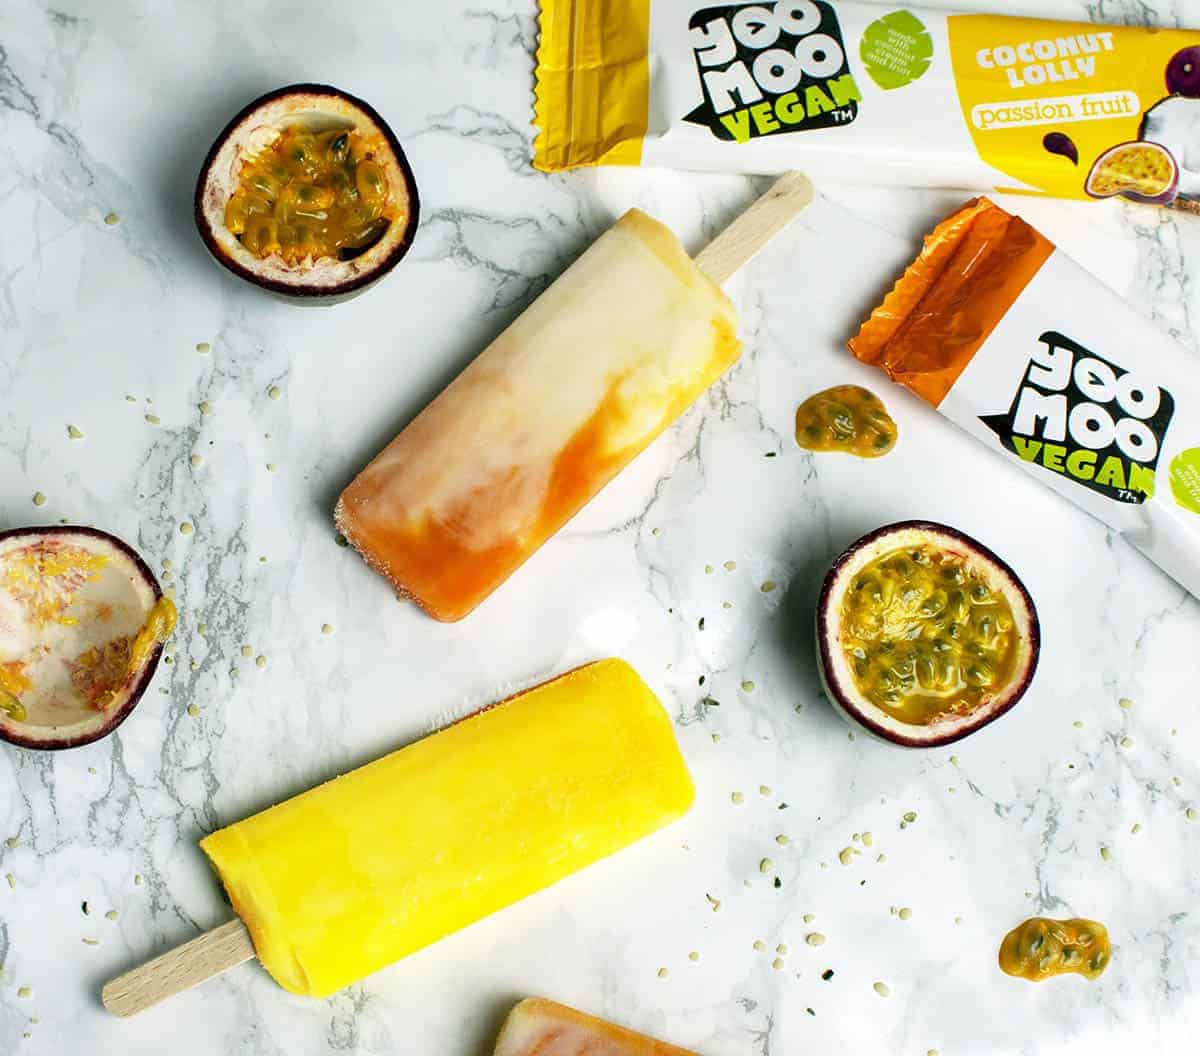 Yoomoo vegan lollies on a whiet background with passion fruits decorating the background 